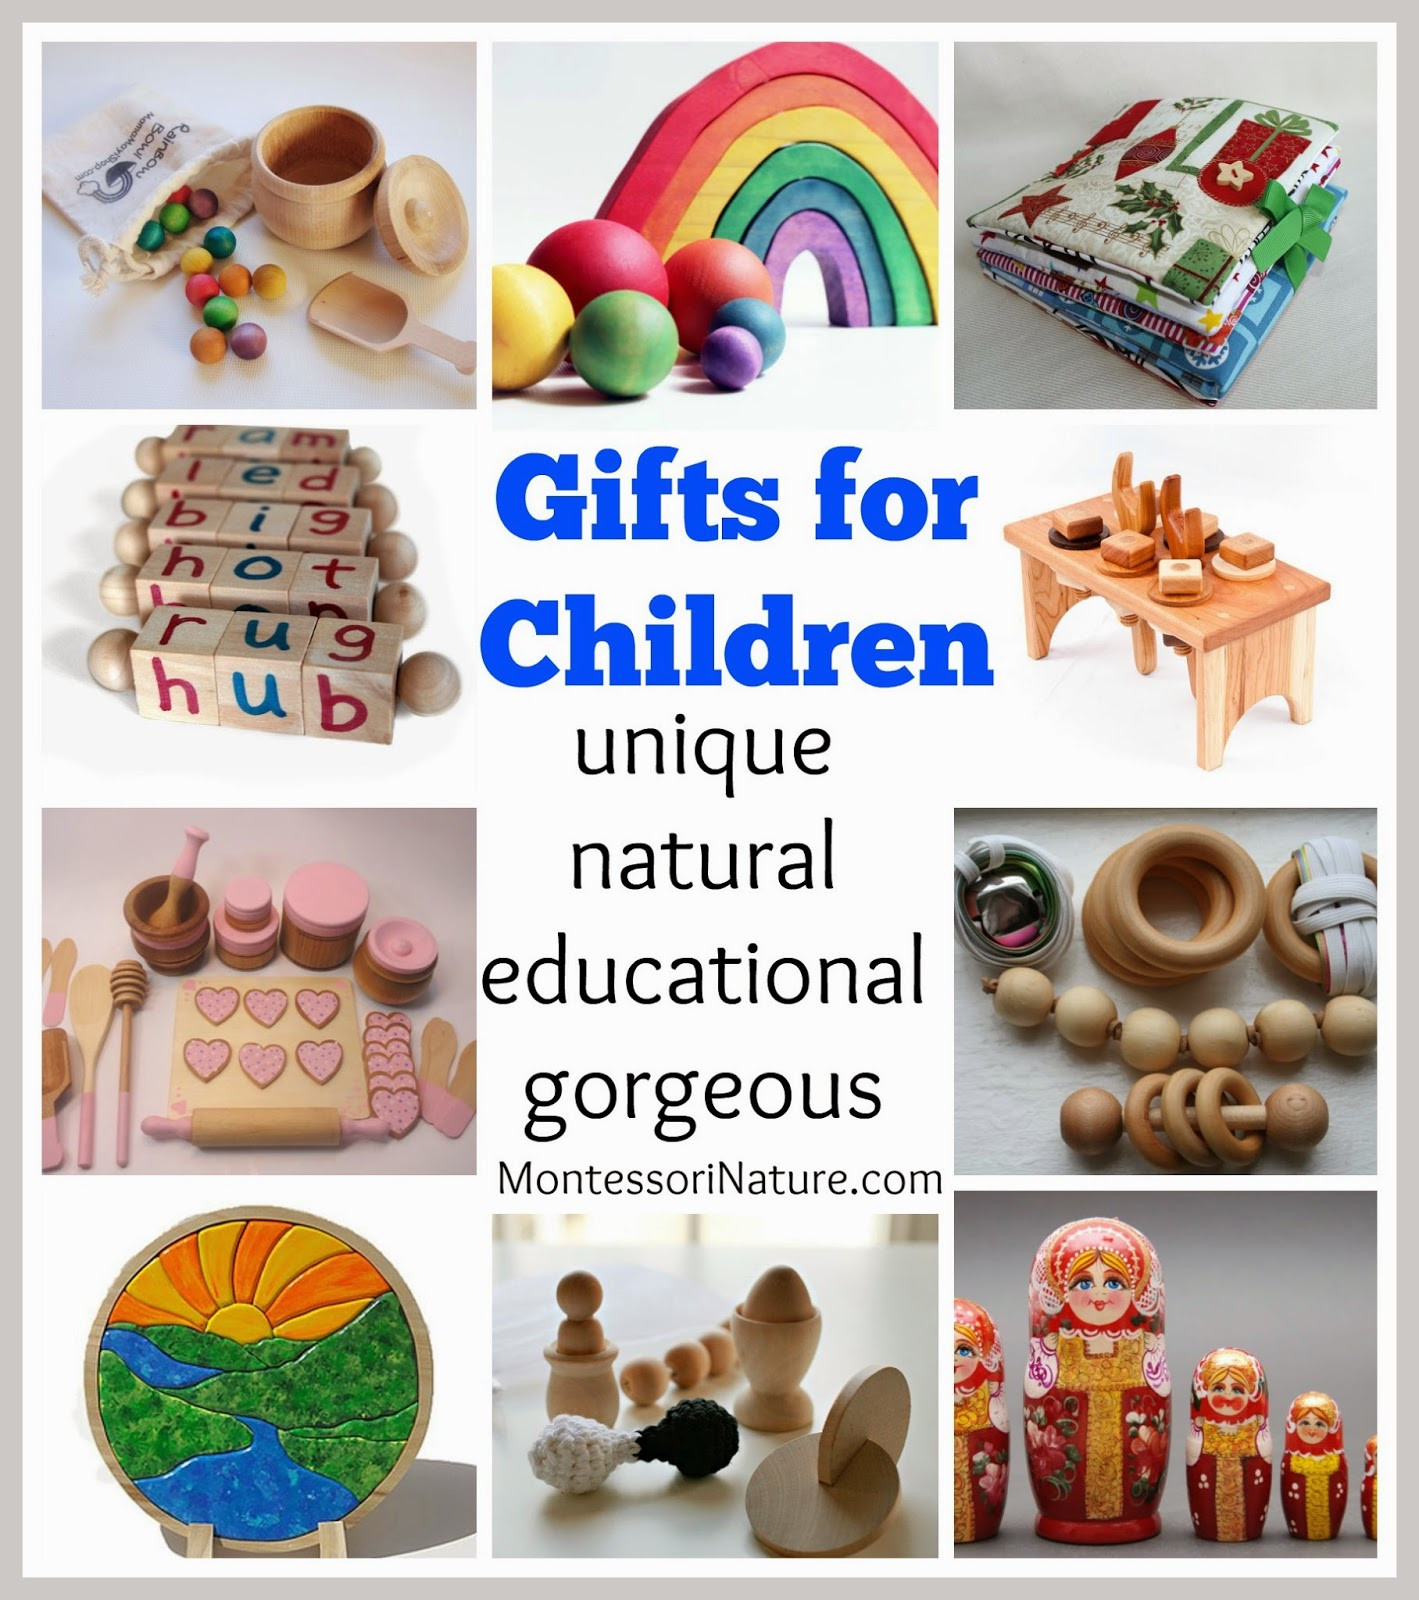 Educational Gifts For Kids
 Gifts for Children Unique Natural Educational Gorgeous